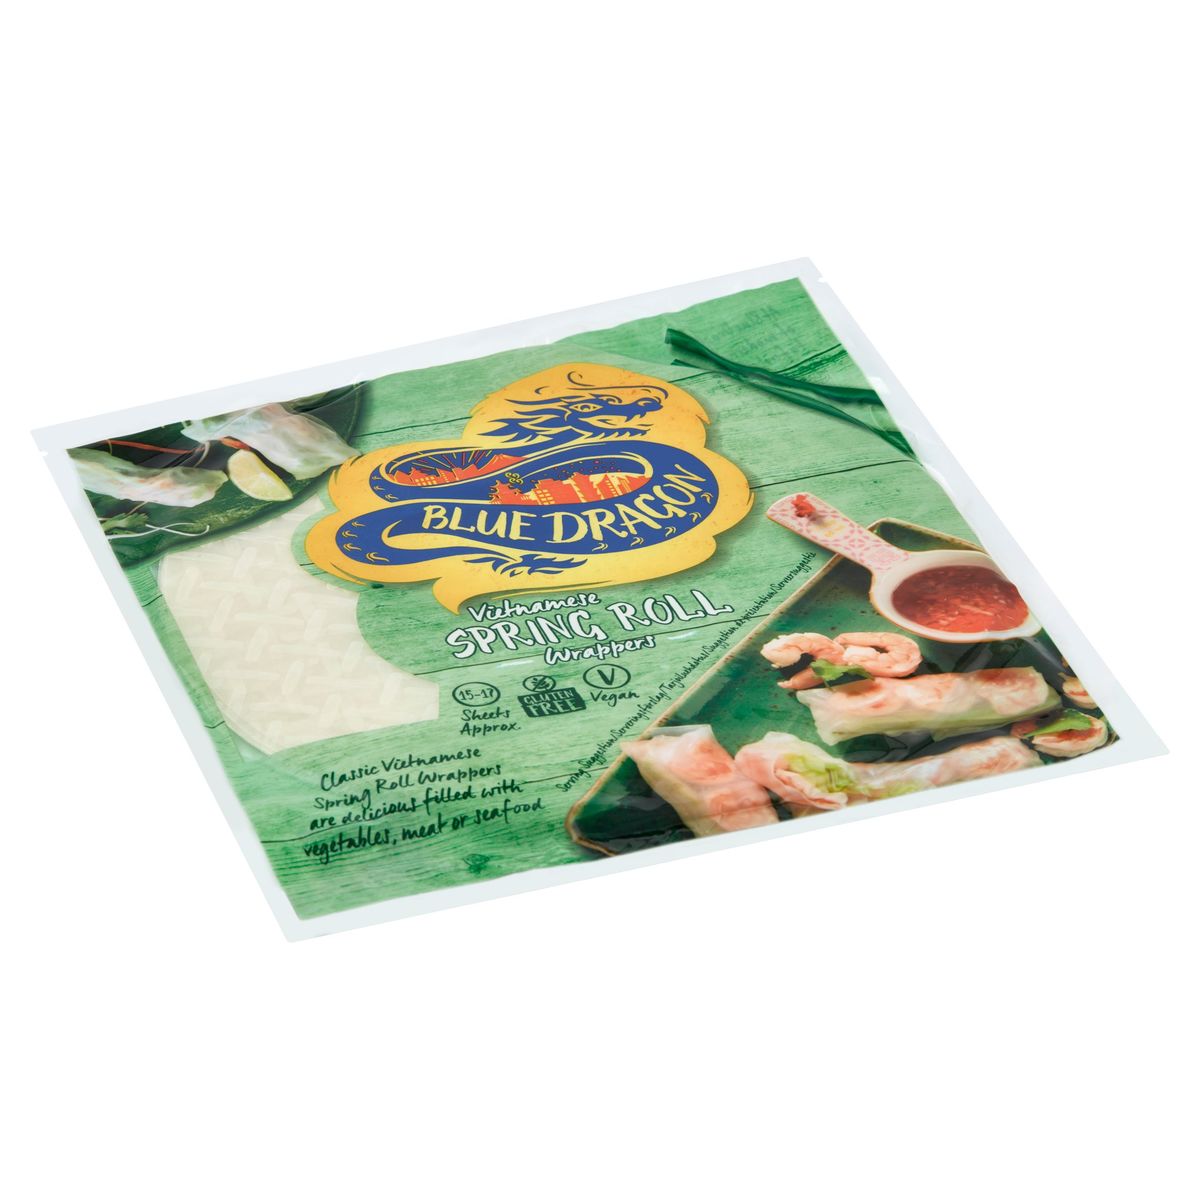 Blue Dragon Vietnamese Spring Roll Wrappers 134 g